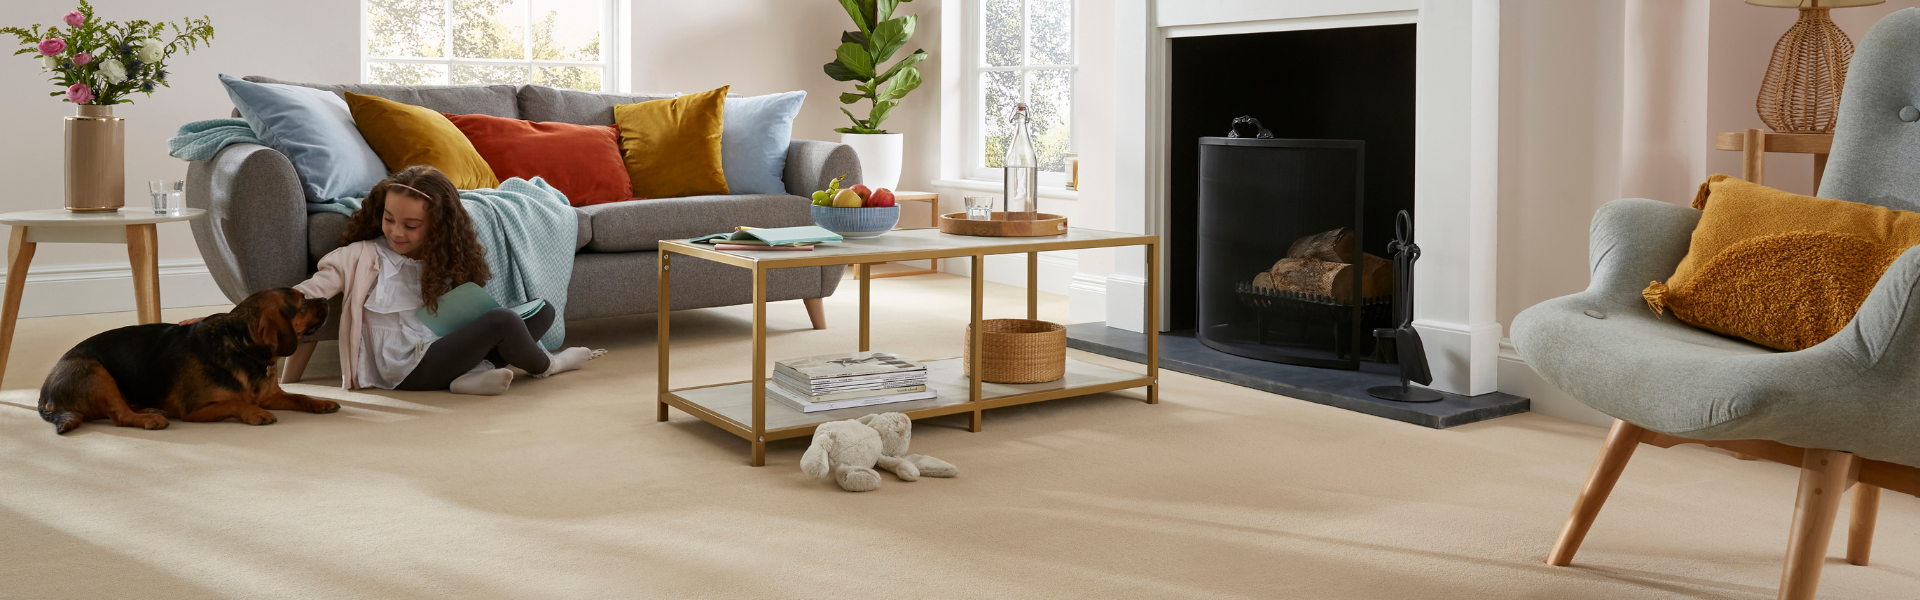 Thinking Beyond by Kingsmead Carpets 